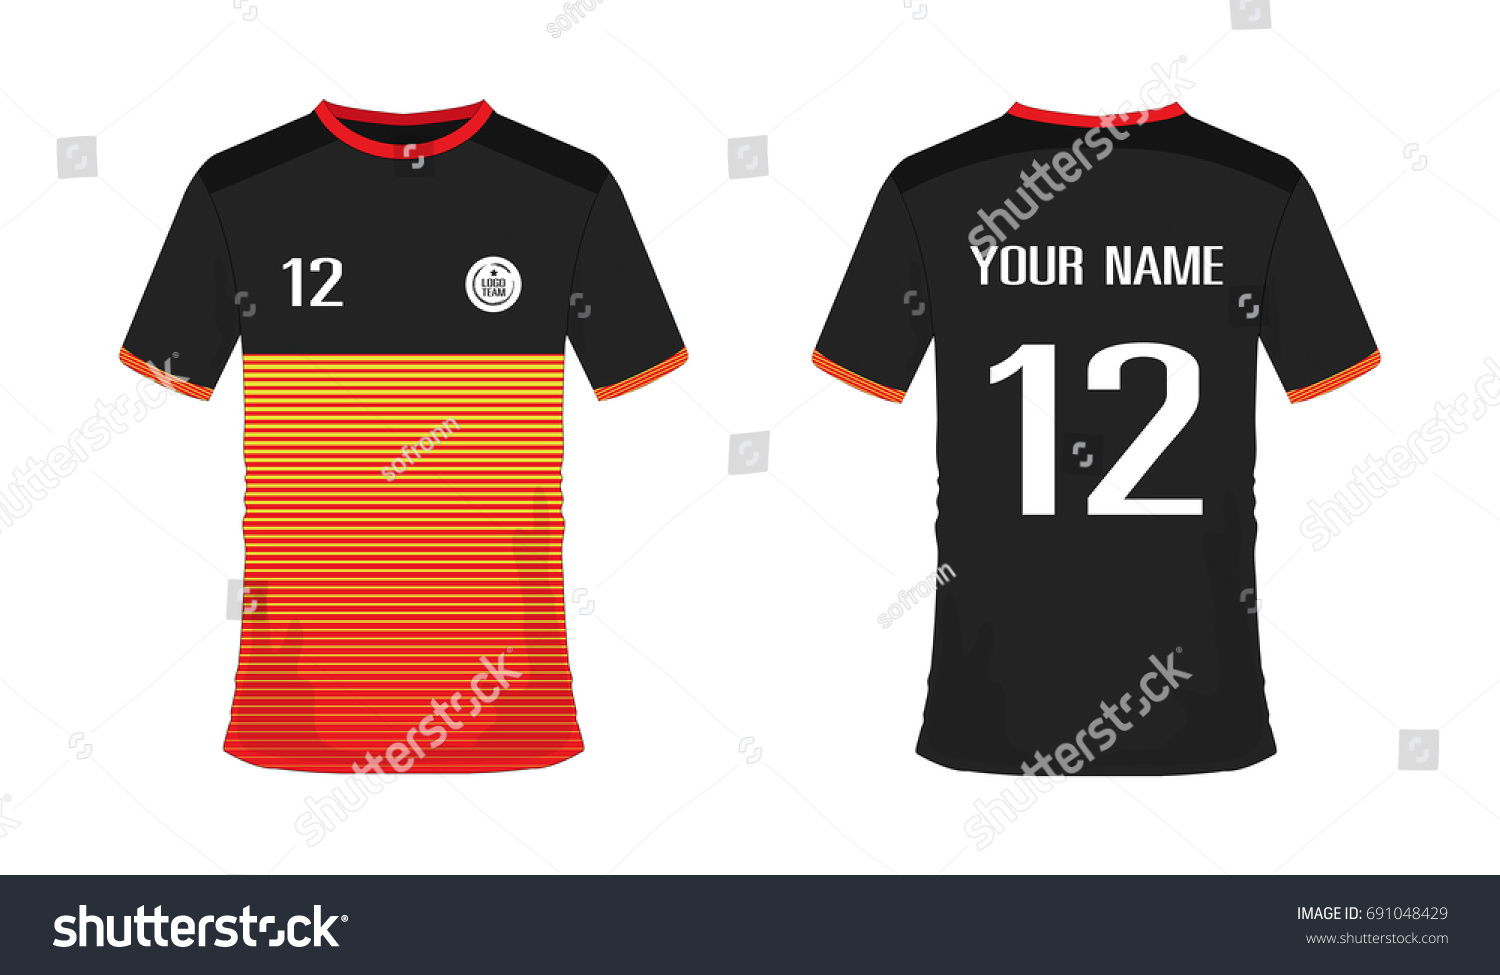 Download Tshirt Red Black Soccer Football Template Stock Vector ...